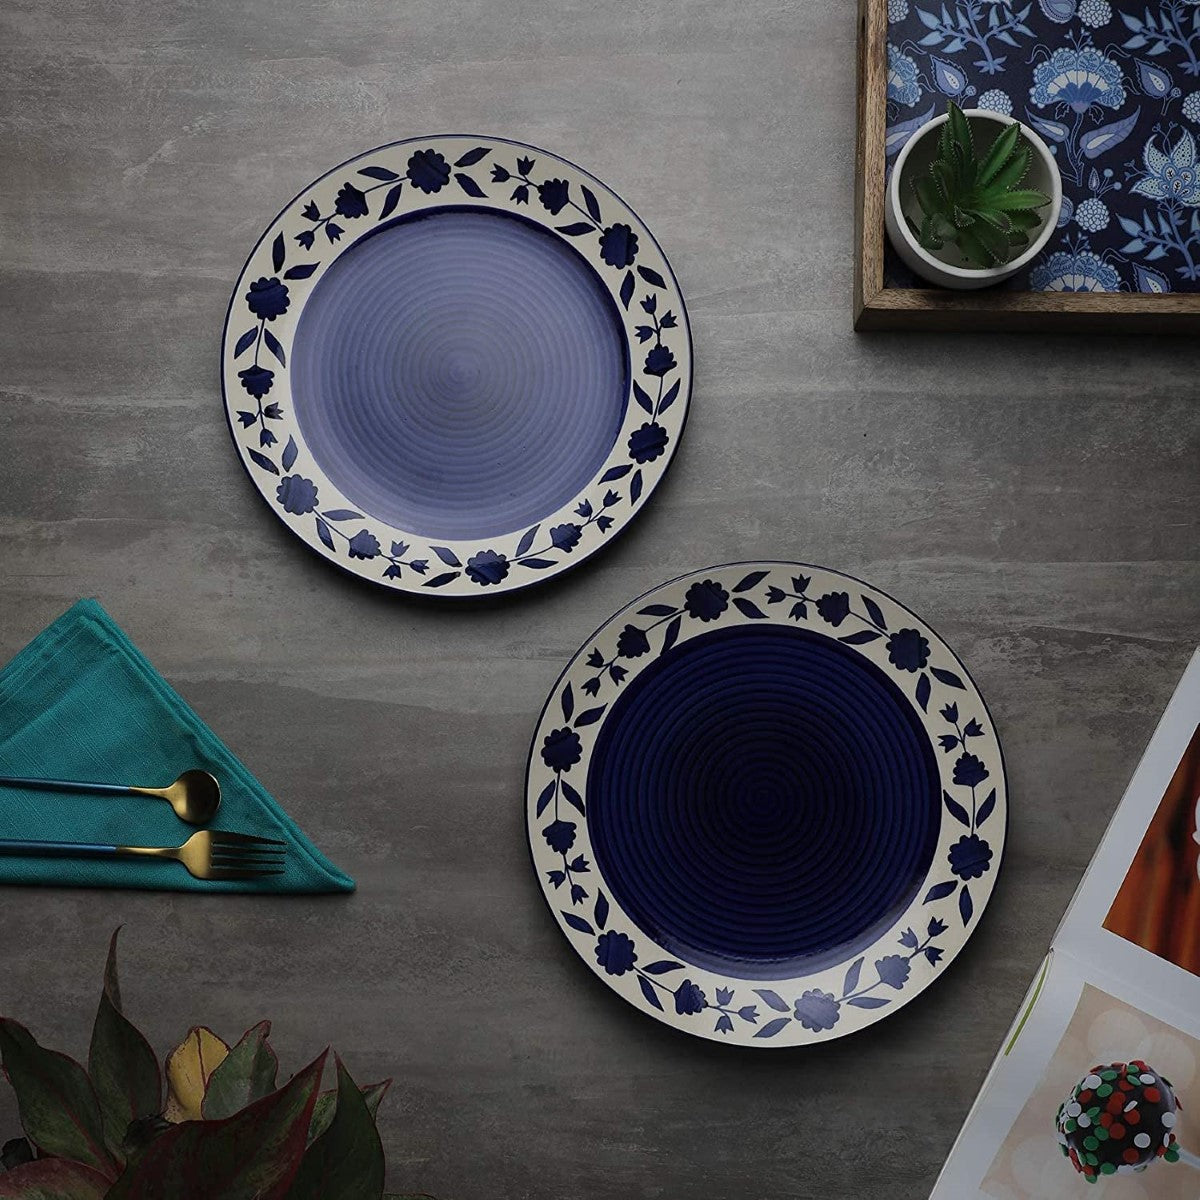 Floral Blue And White Handpainted Ceramic Dinner Plates (Set of 2)